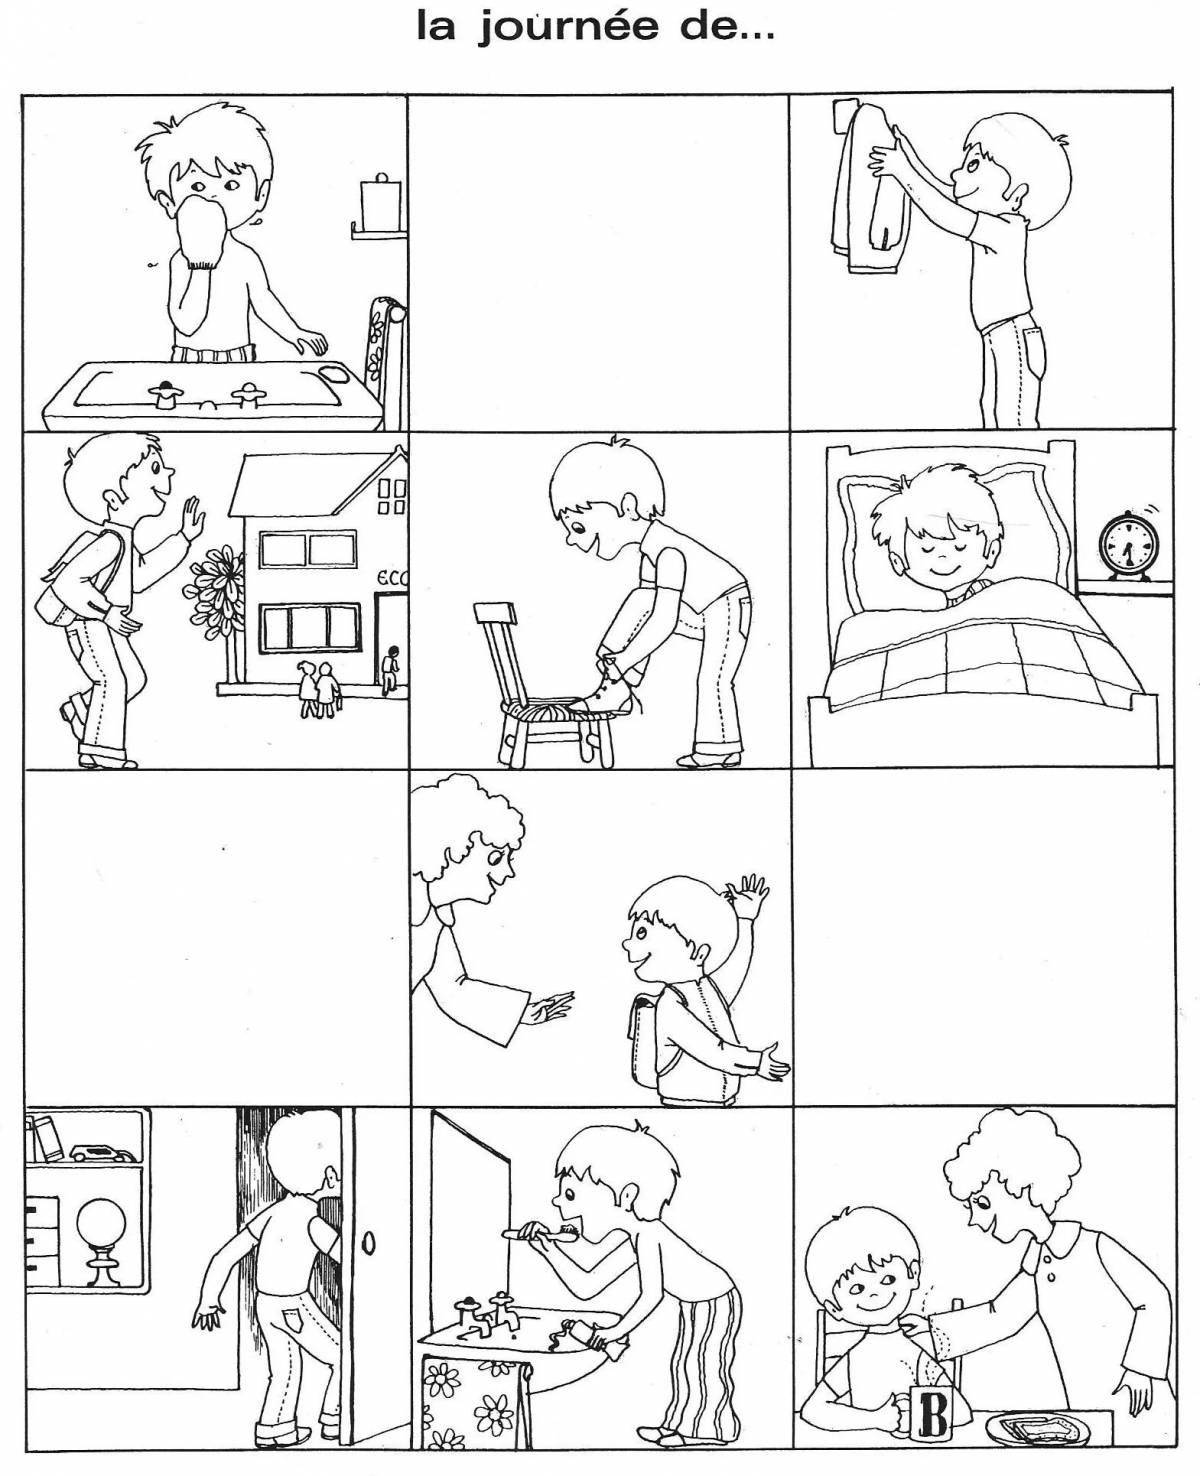 Playful elementary school routine coloring page template